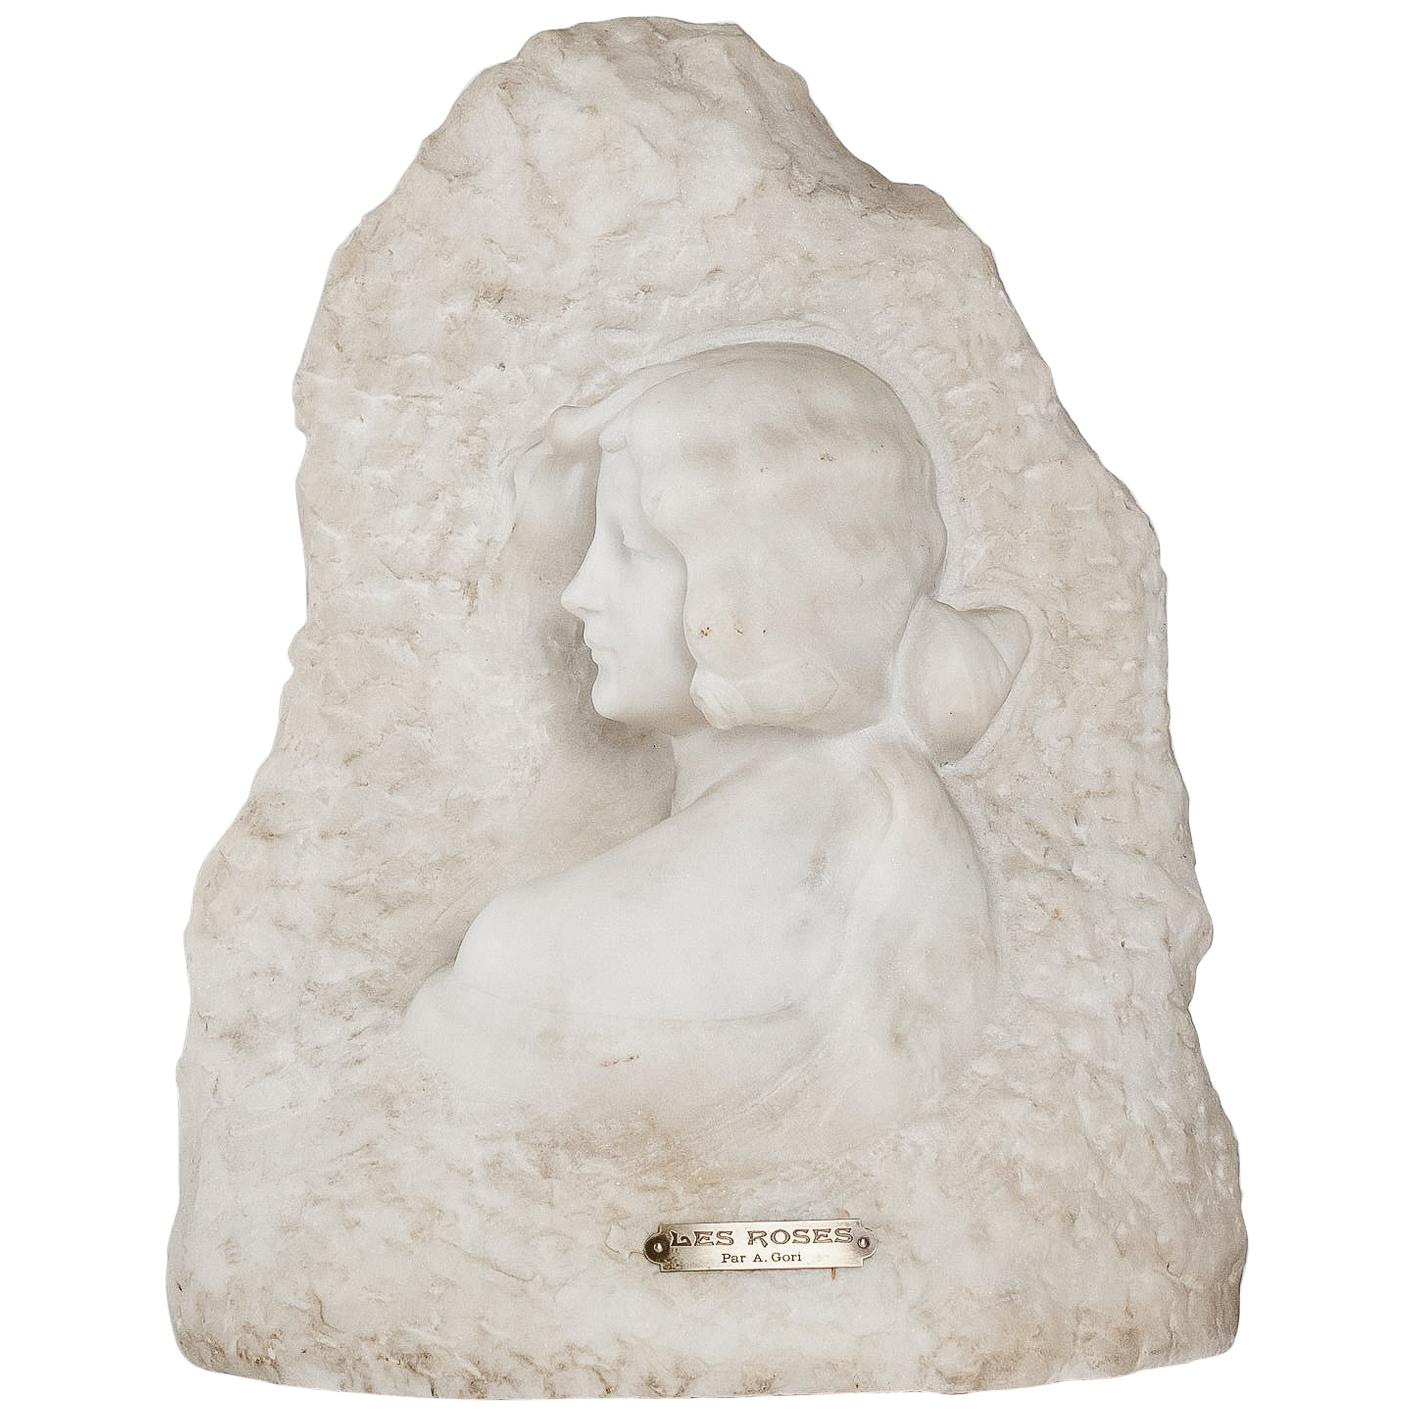 Sign by Gory Affortunato White Carrara Marble Sculpture 'The Roses', circa 1900 For Sale